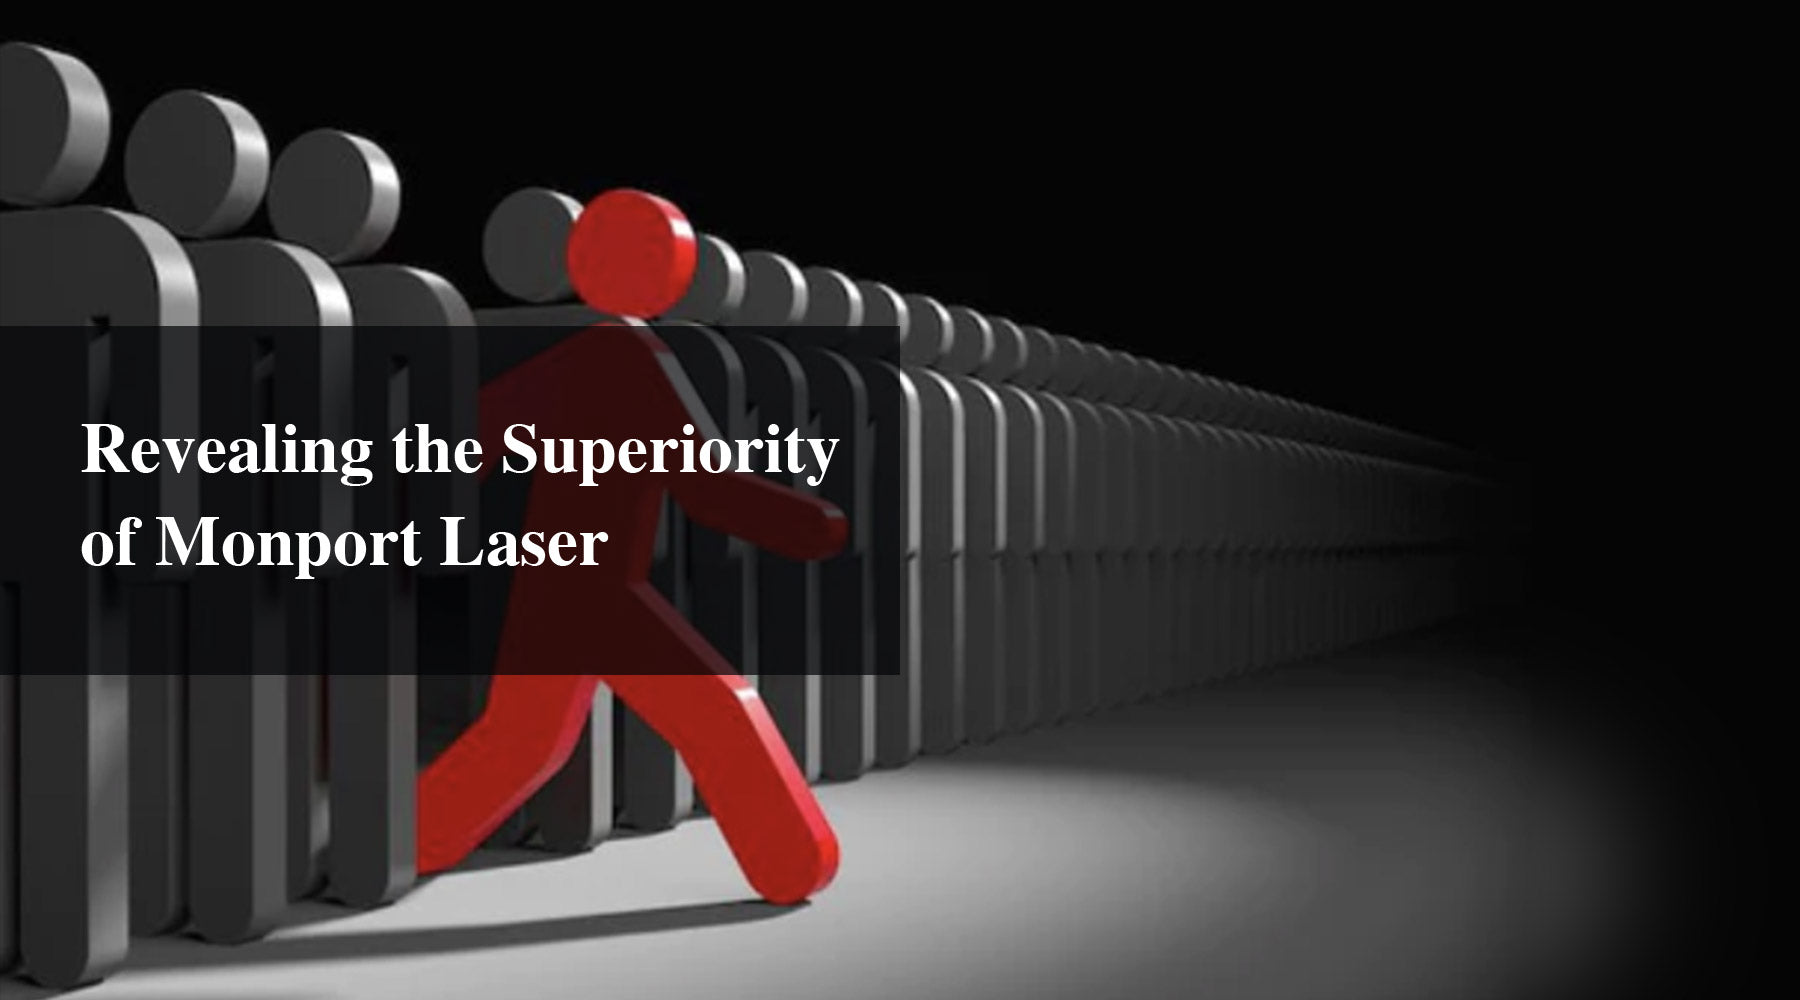 Revealing the Superiority of Monport Laser